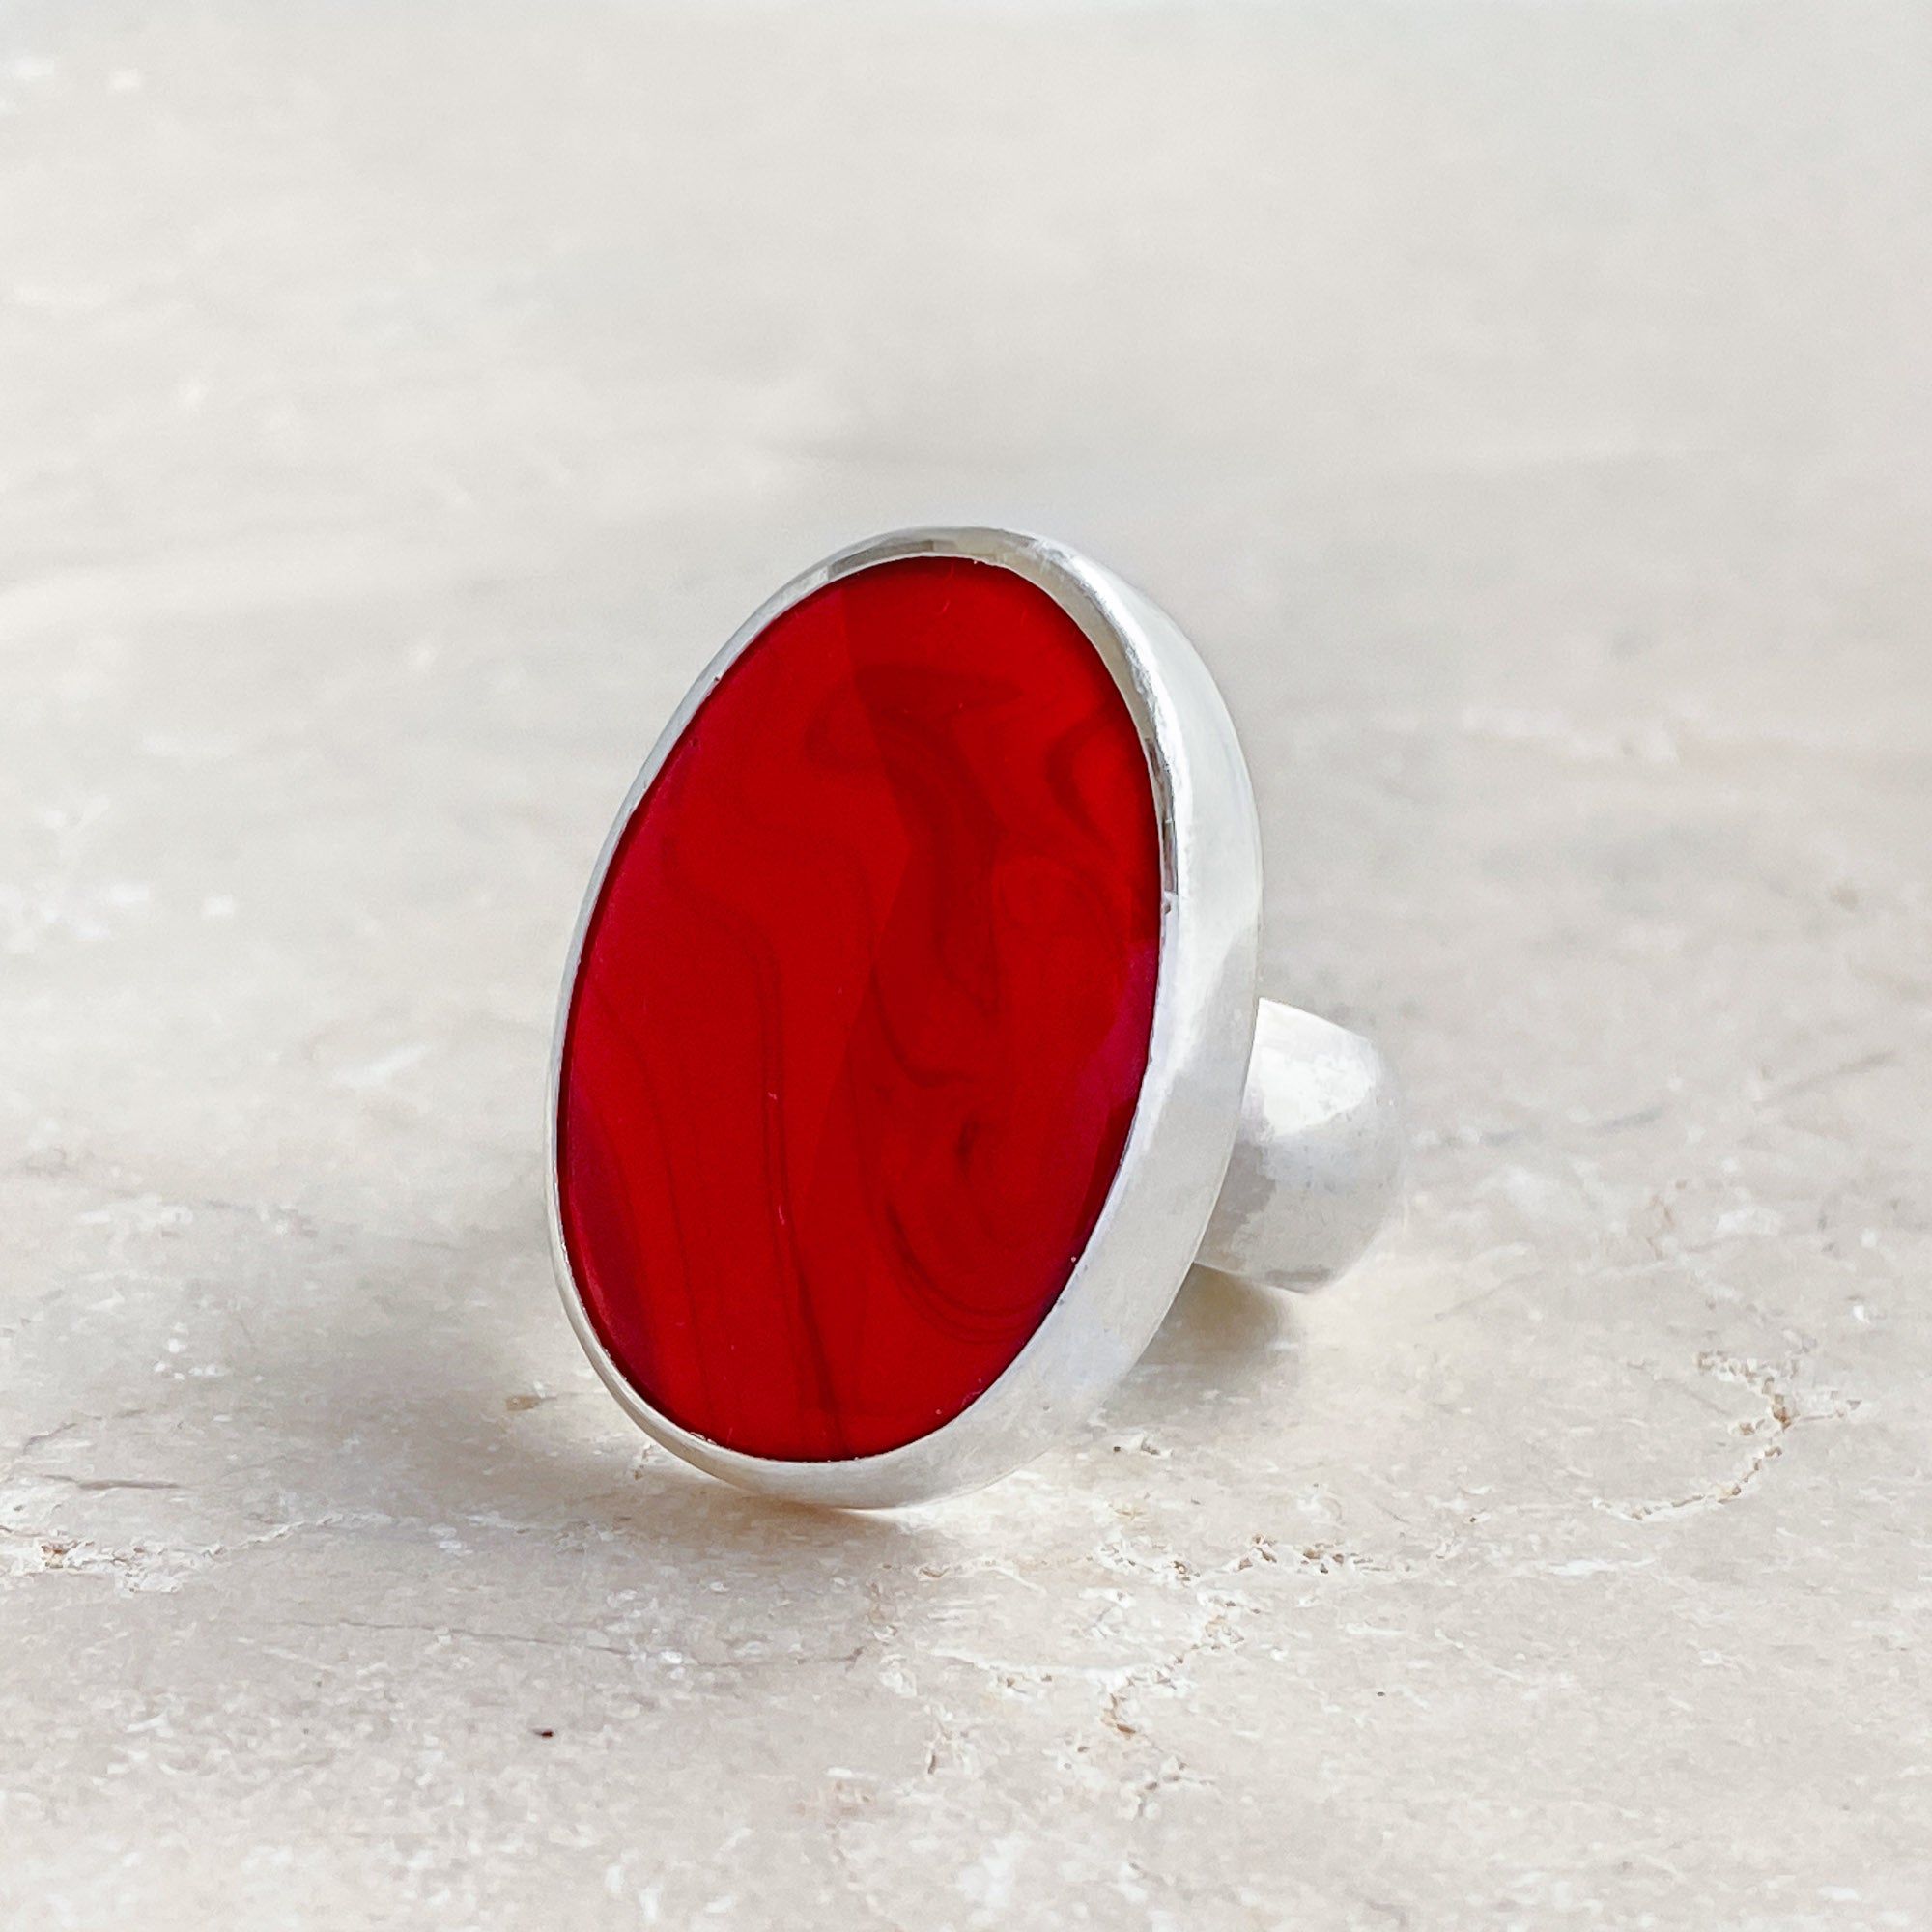 Large Red Rosarita and Silver ring handmade in the UK by Laura De Zordo